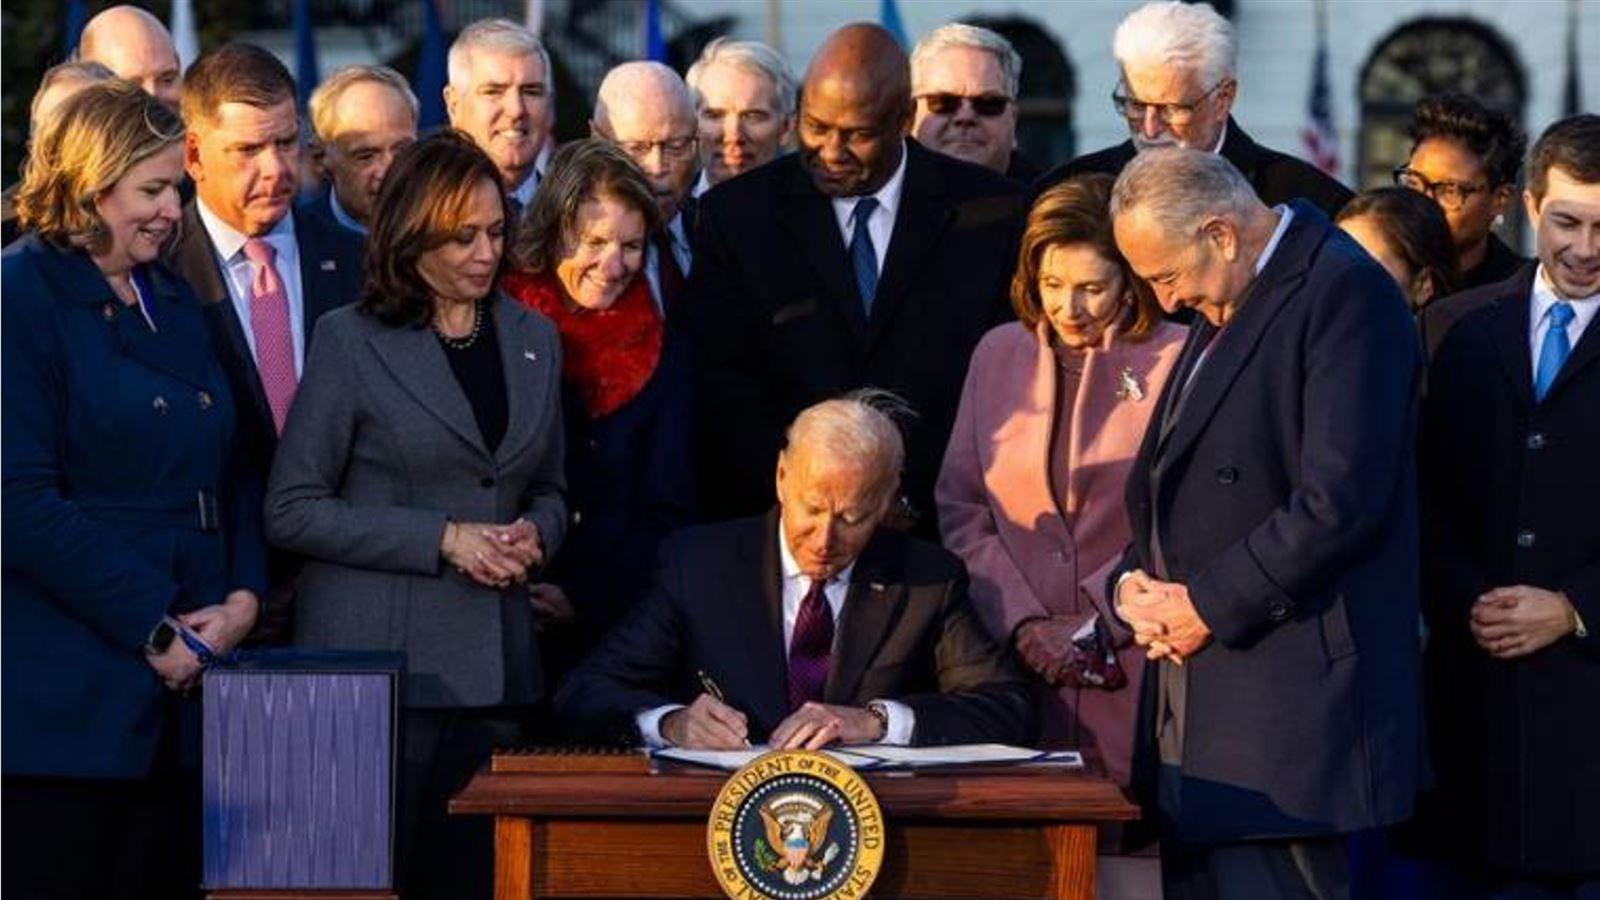 A group of political figures gathered around President Biden as he signs the Infrastructure Bill